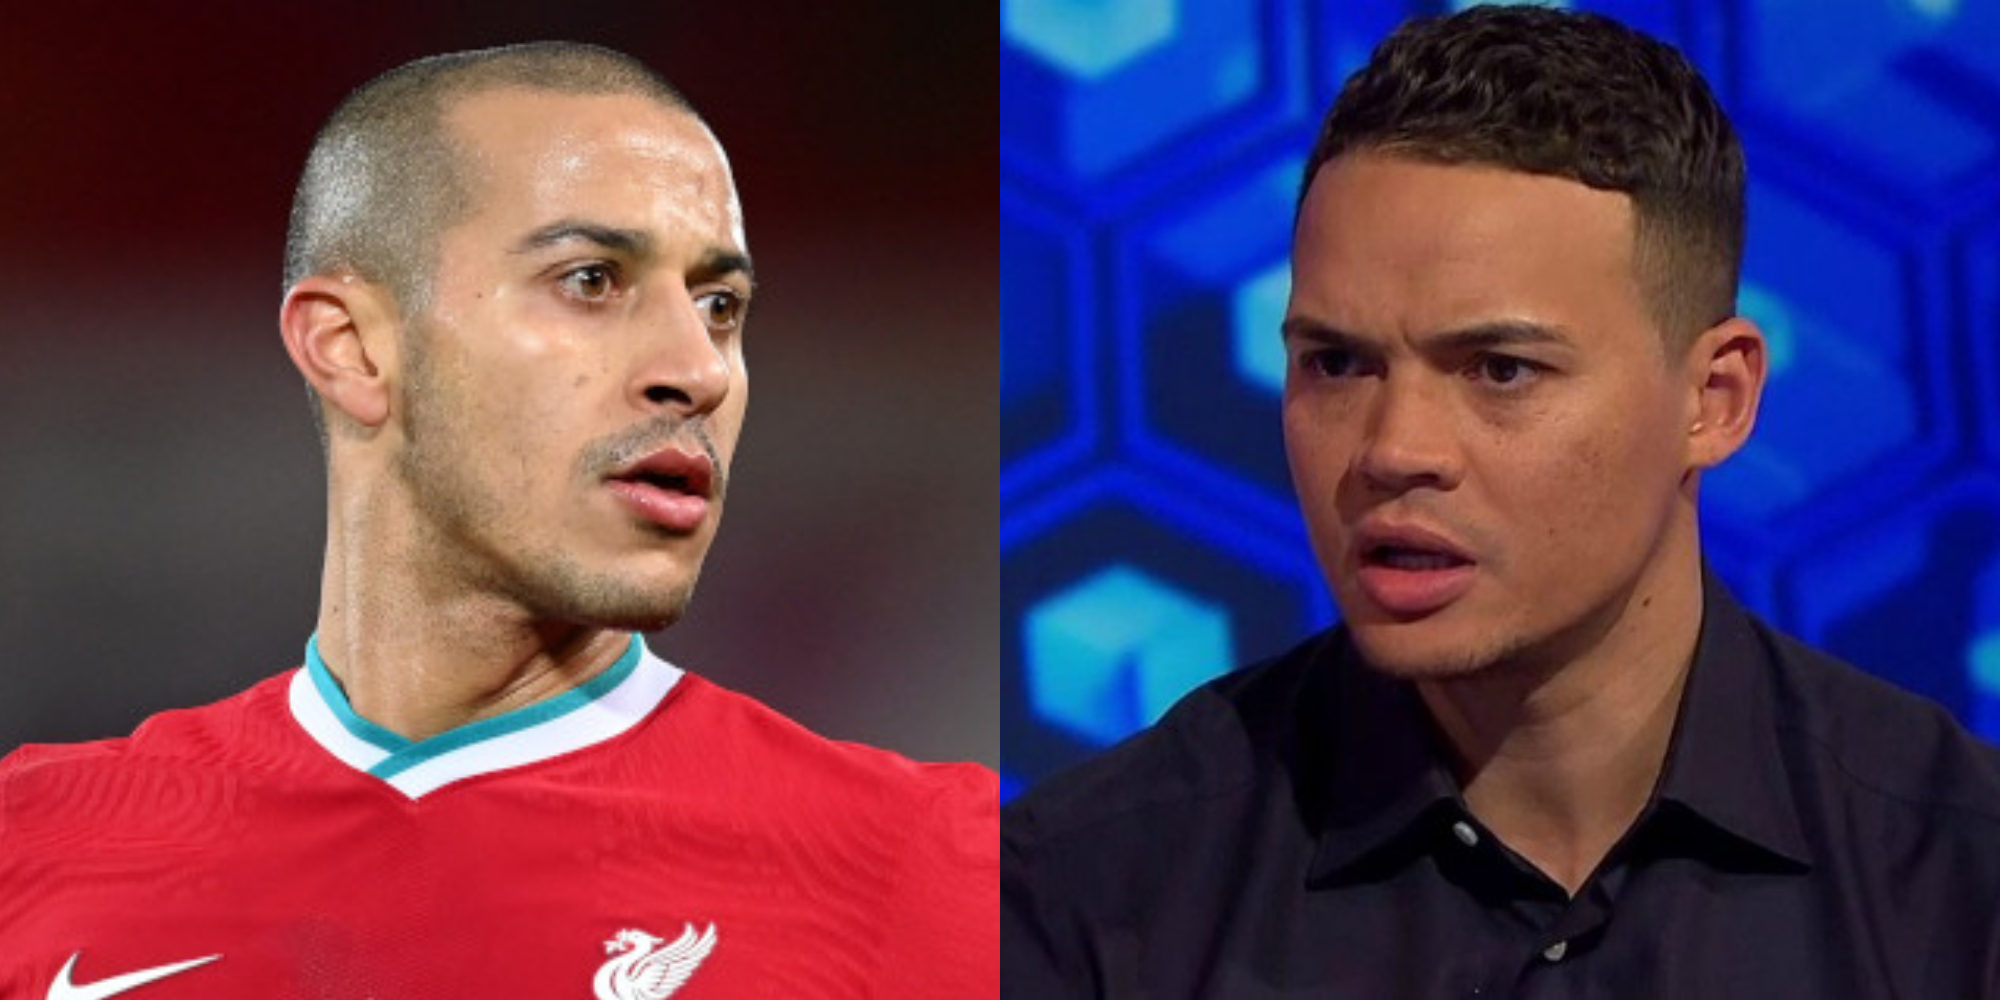 Jermaine Jenas offers advice to Liverpool star Thiago to improve his performances